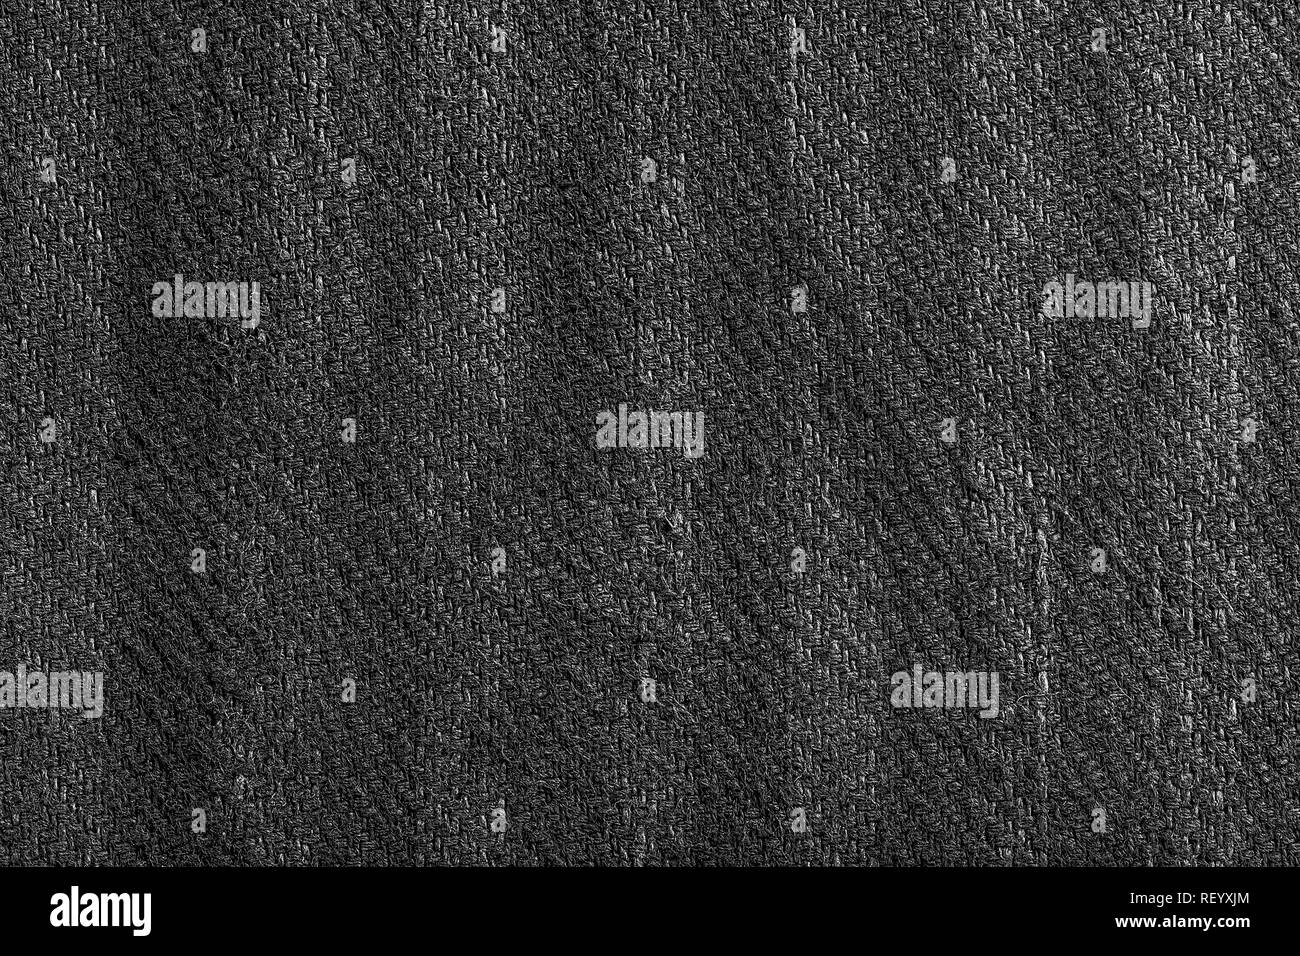 Texture fabric texture Black and White Stock Photos & Images - Alamy